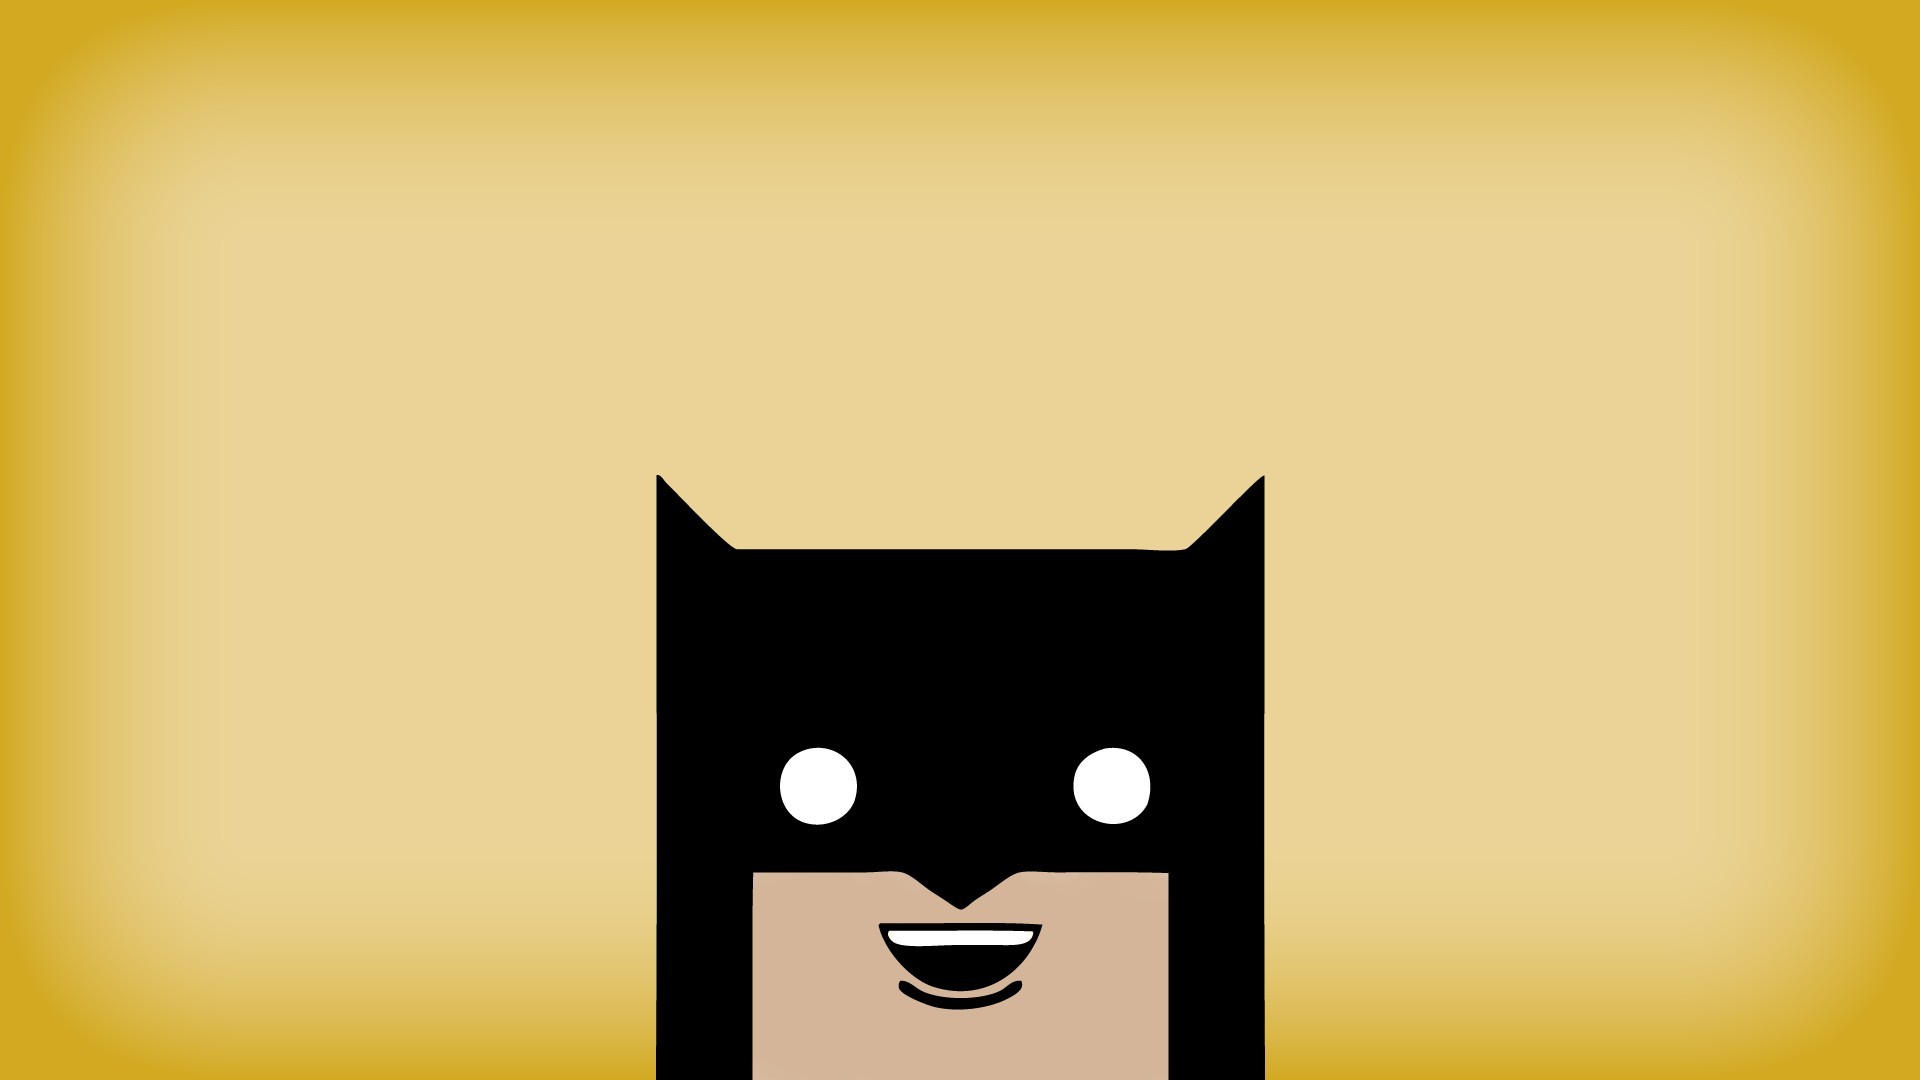 General 1920x1080 simple background yellow minimalism DC Comics Batman digital art smiling open mouth looking at viewer mask